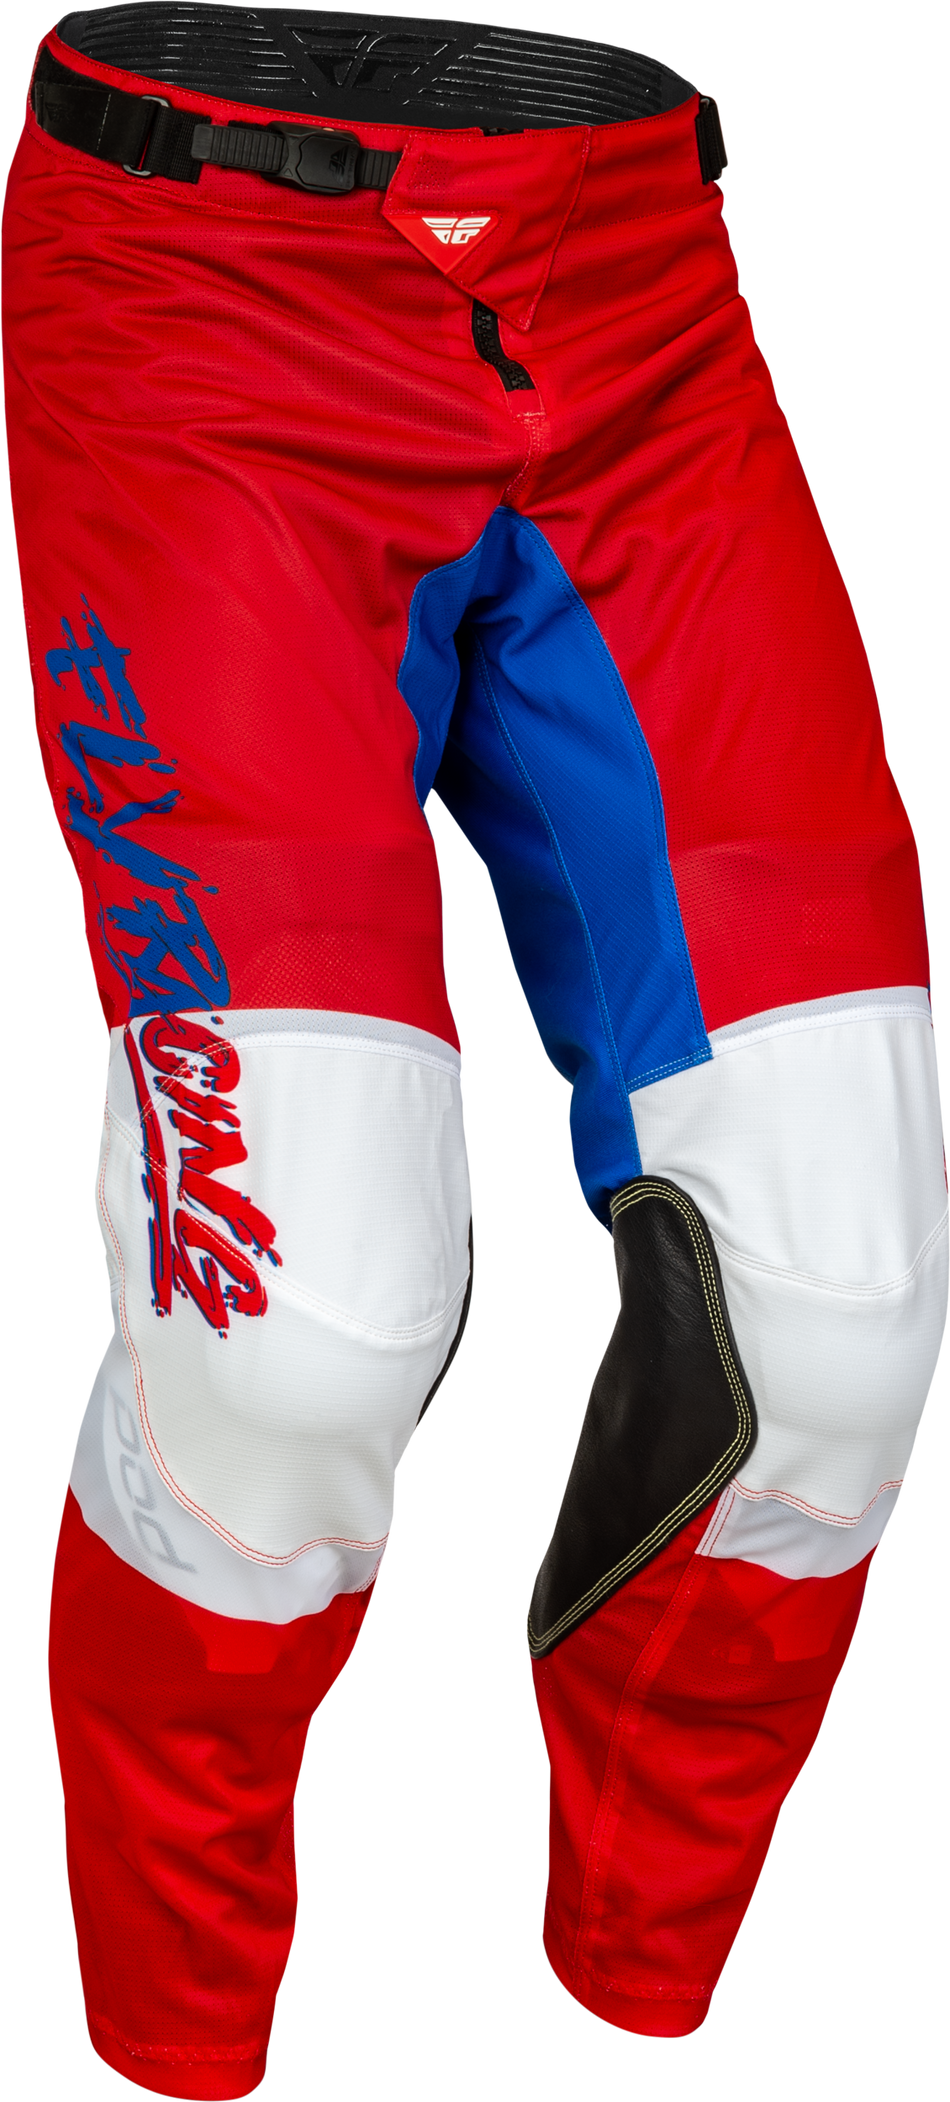 FLY RACING Youth Kinetic Mesh Khaos Pants Red/White/Blue Sz 26 377-34426